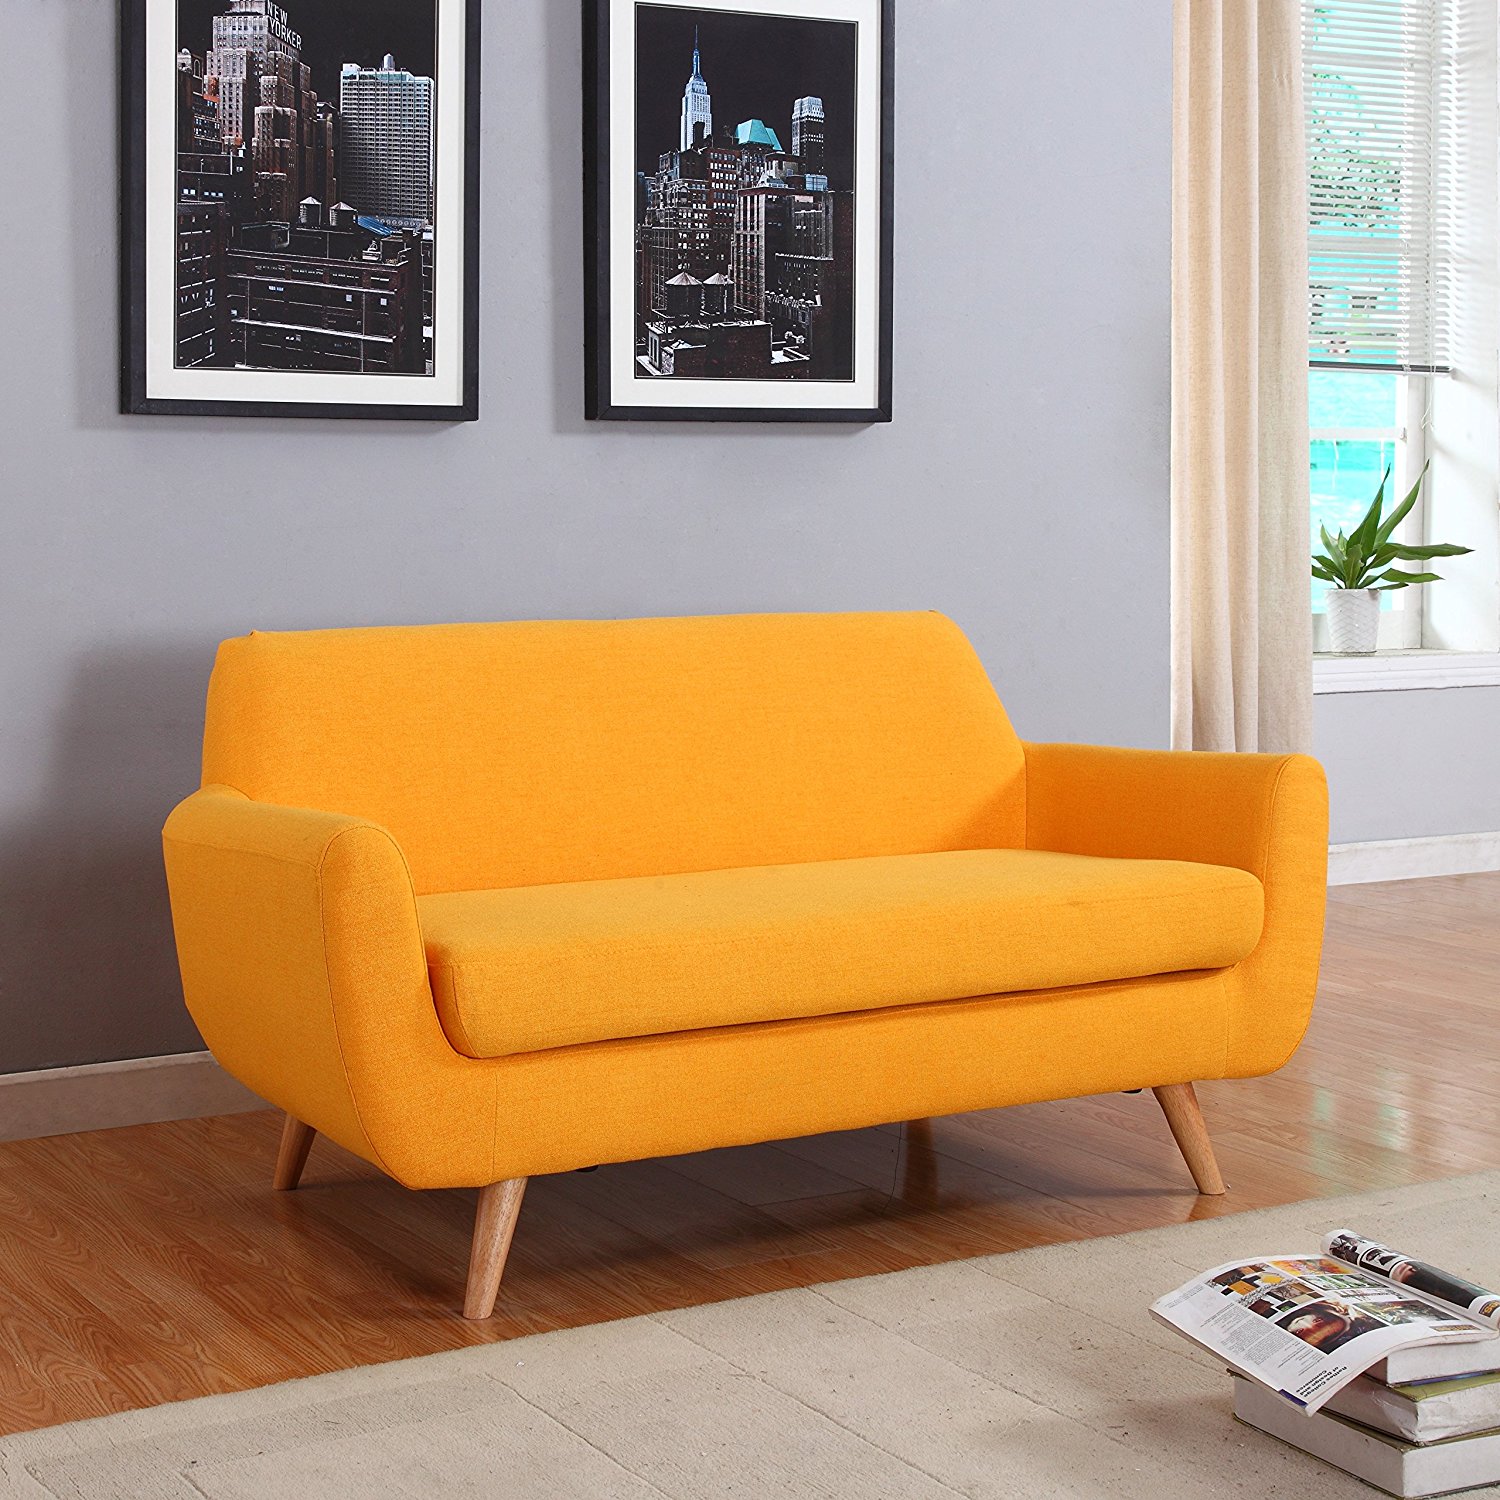 Sofa in an almost orange shade of yellow within a modern living room